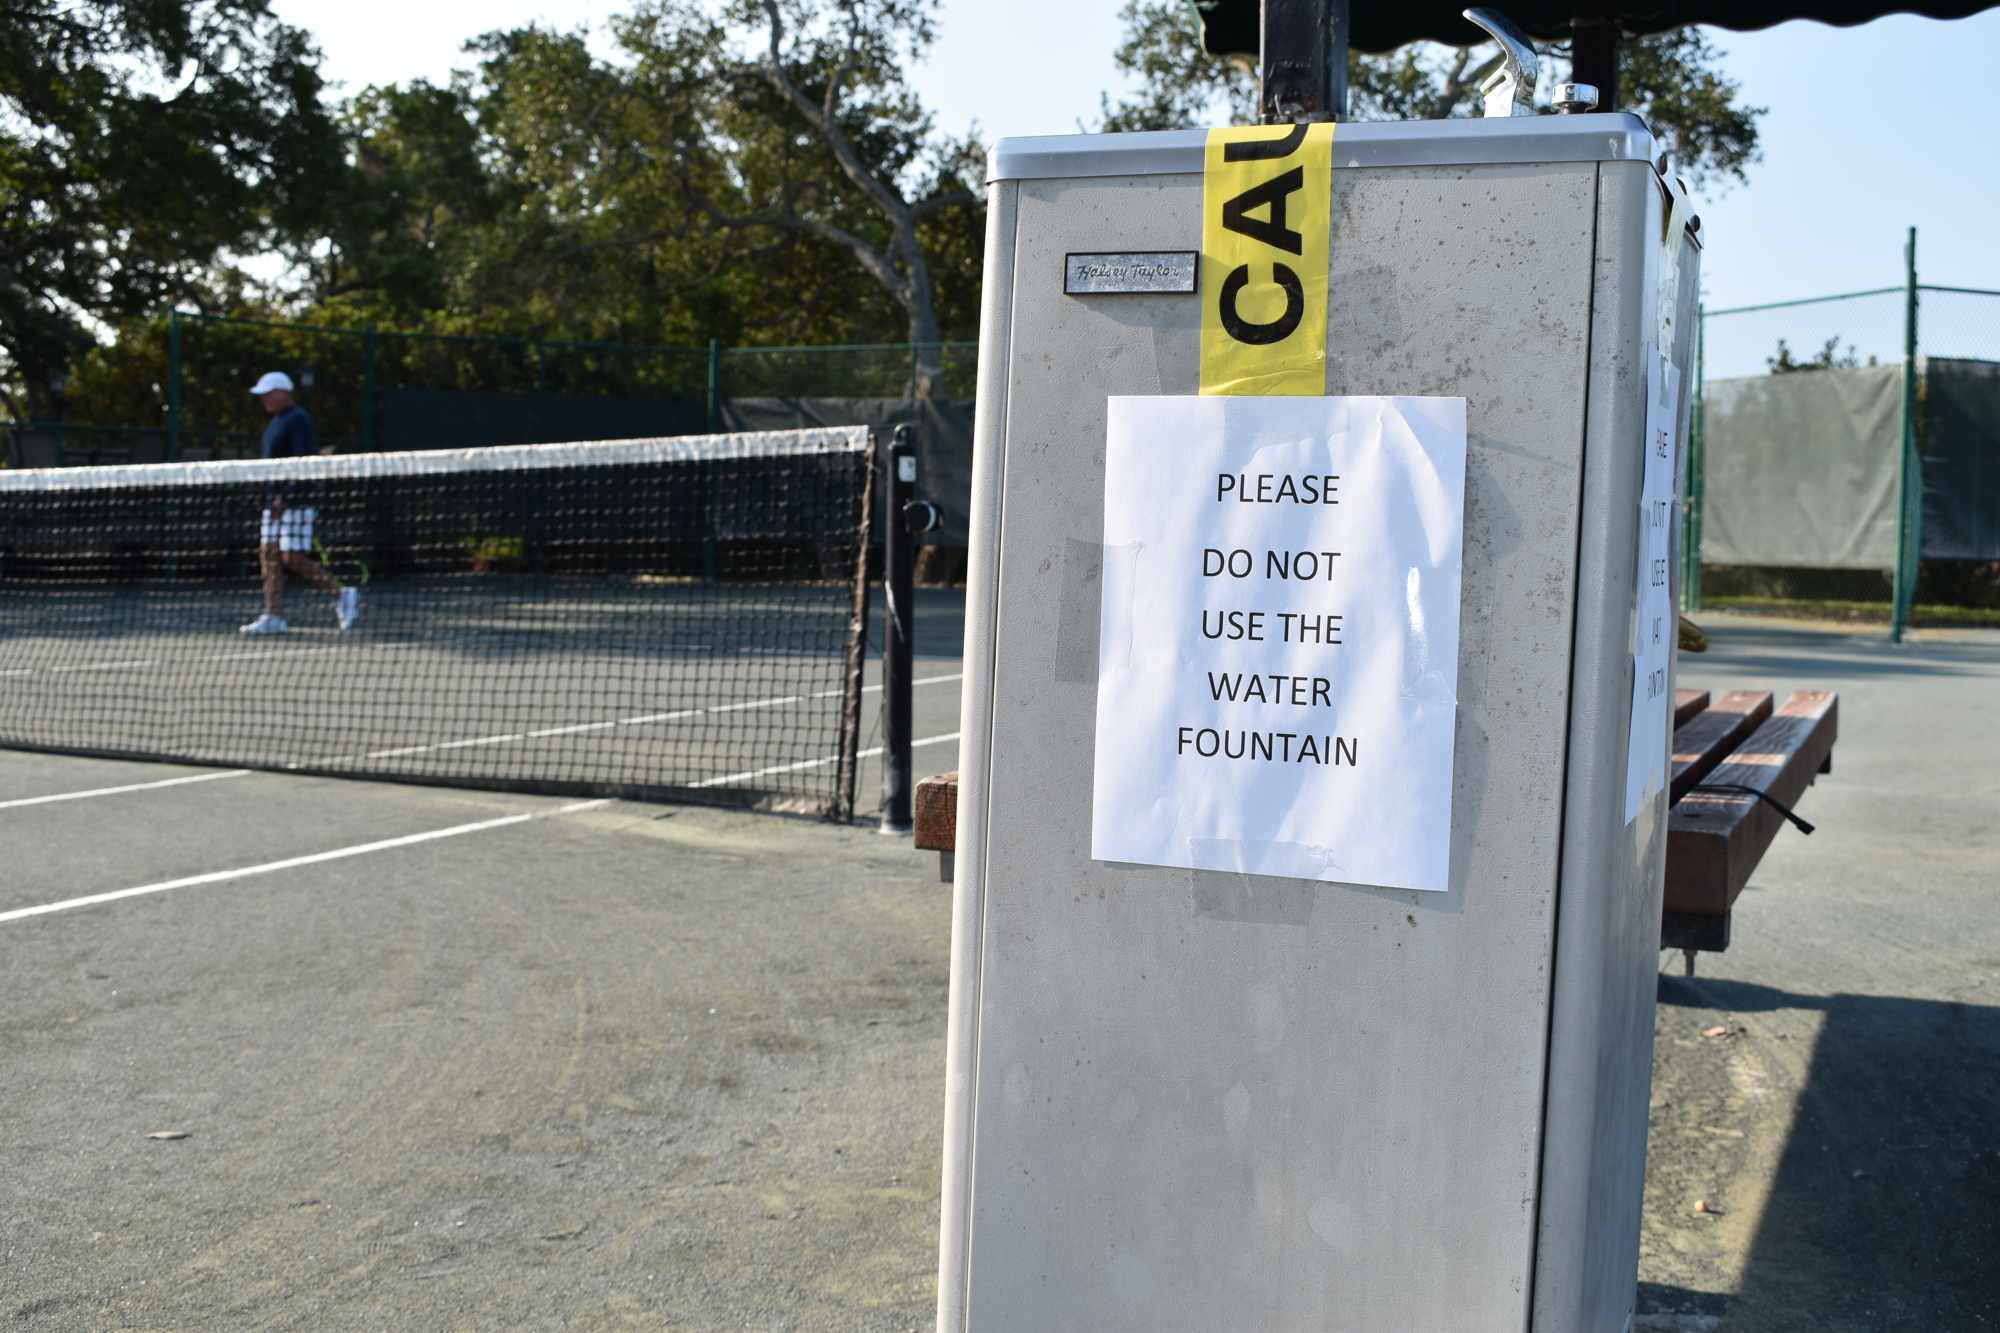 A sign warns members of the Longboat Key Tennis Center not to use the drinking fountains while restrictions are in place because of the COVID-19 pandemic.